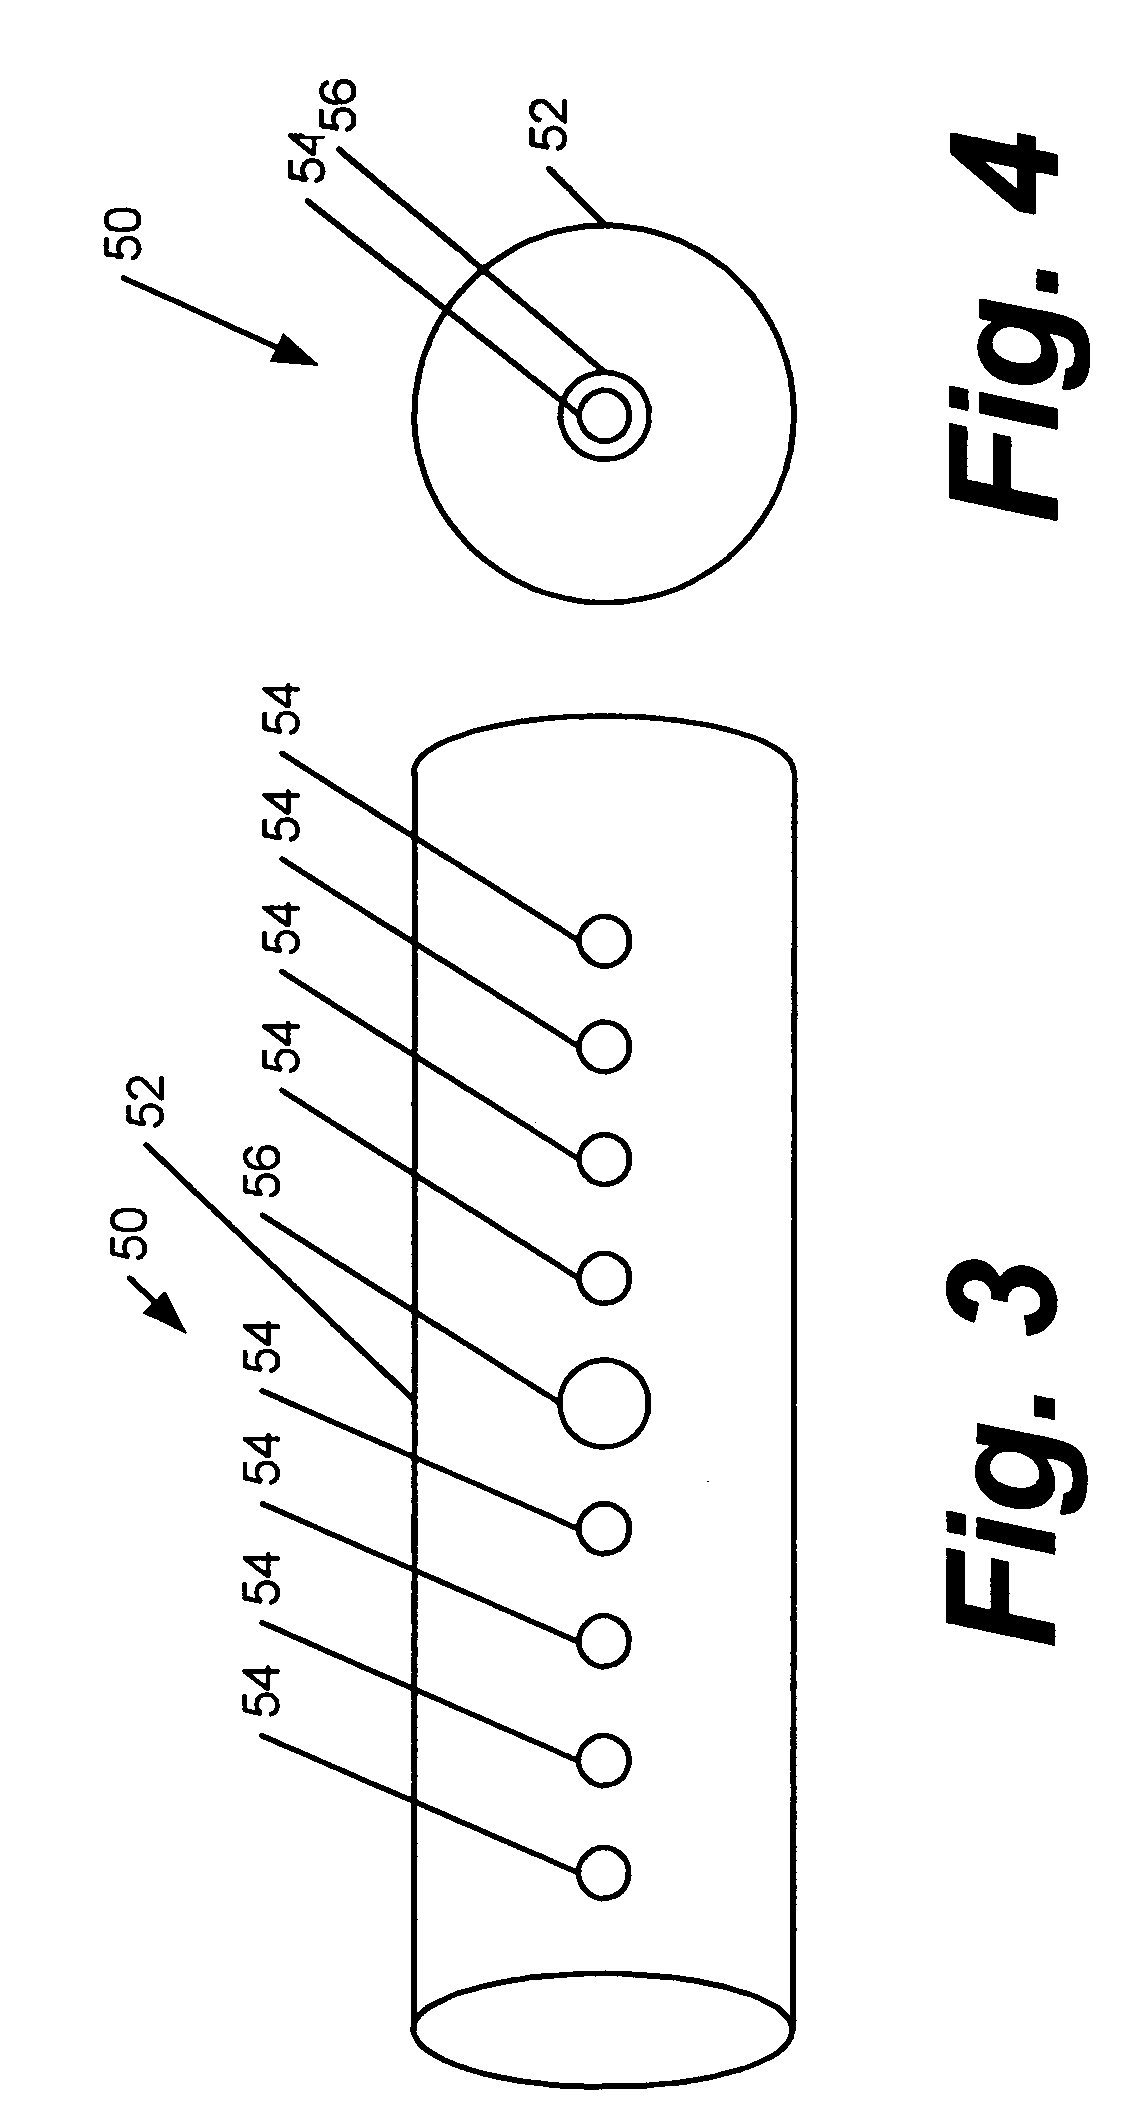 Method and apparatus for calibrating volumetric computed tomography systems